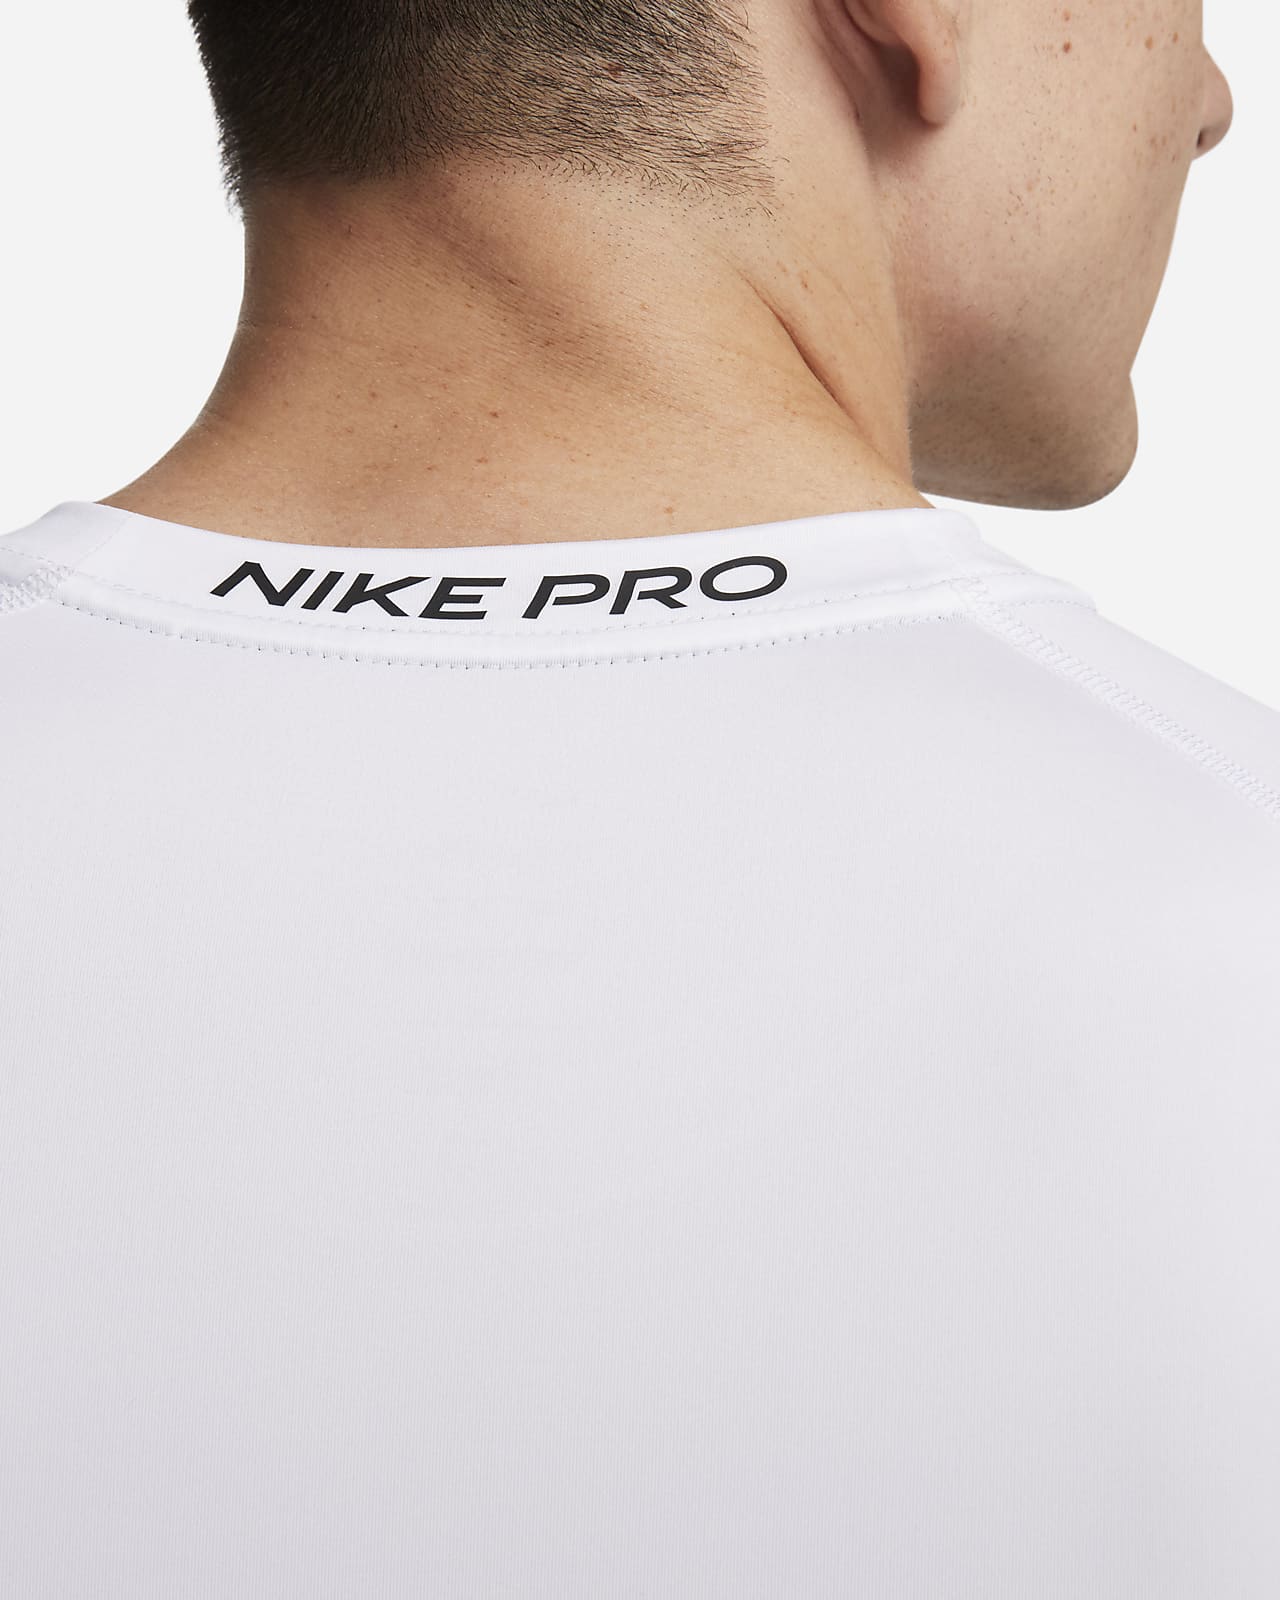 Nike Pro Combat Core LS Top Blanc Taille S